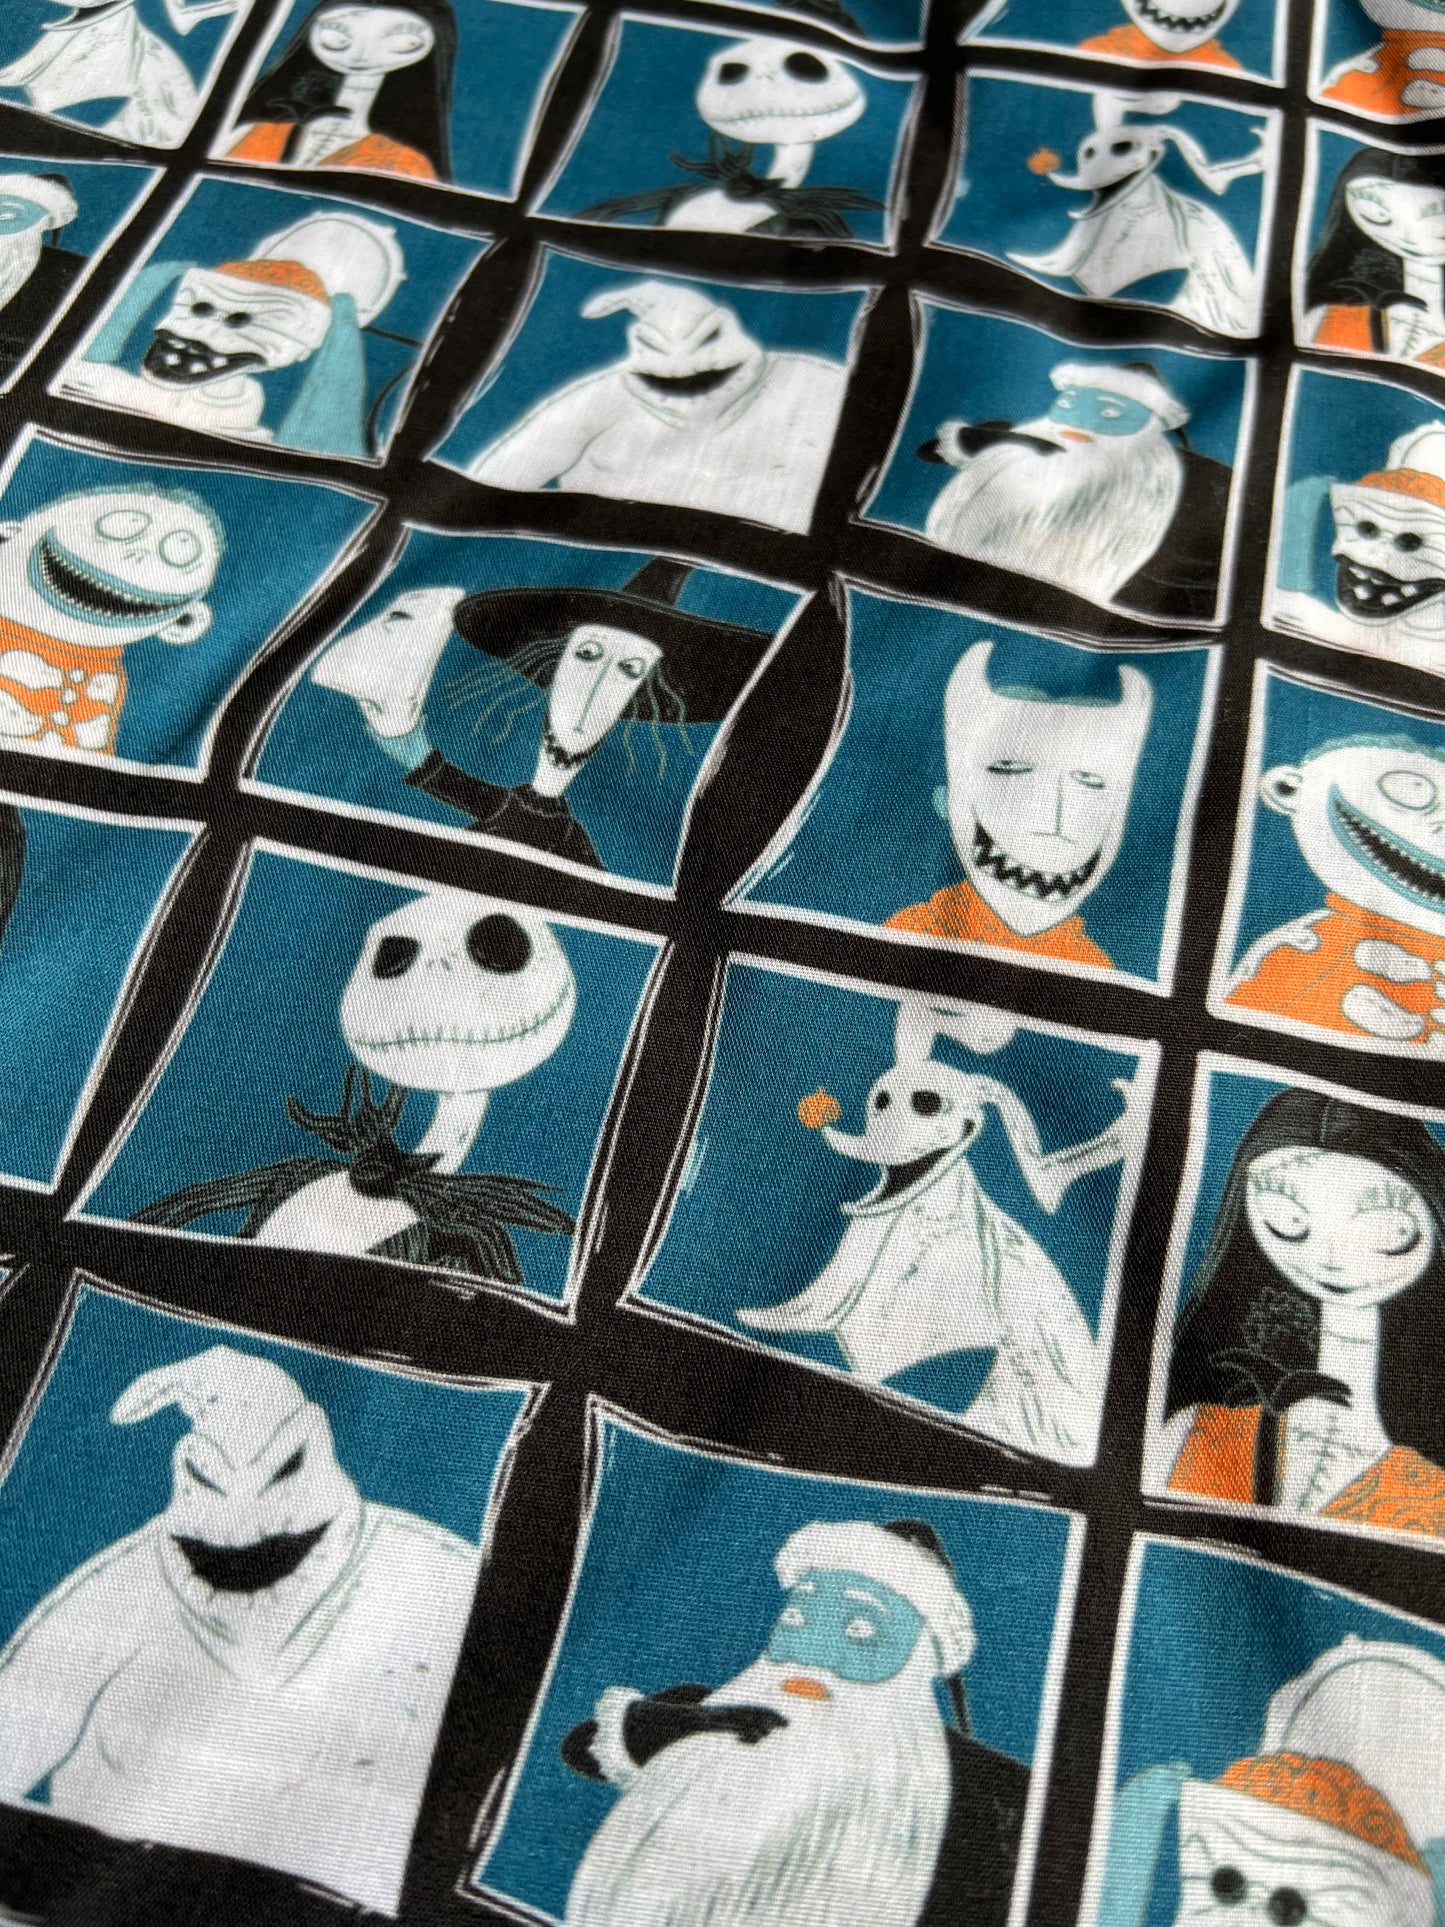 NIGHTMARE BLUES - Polycotton Fabric from Japan